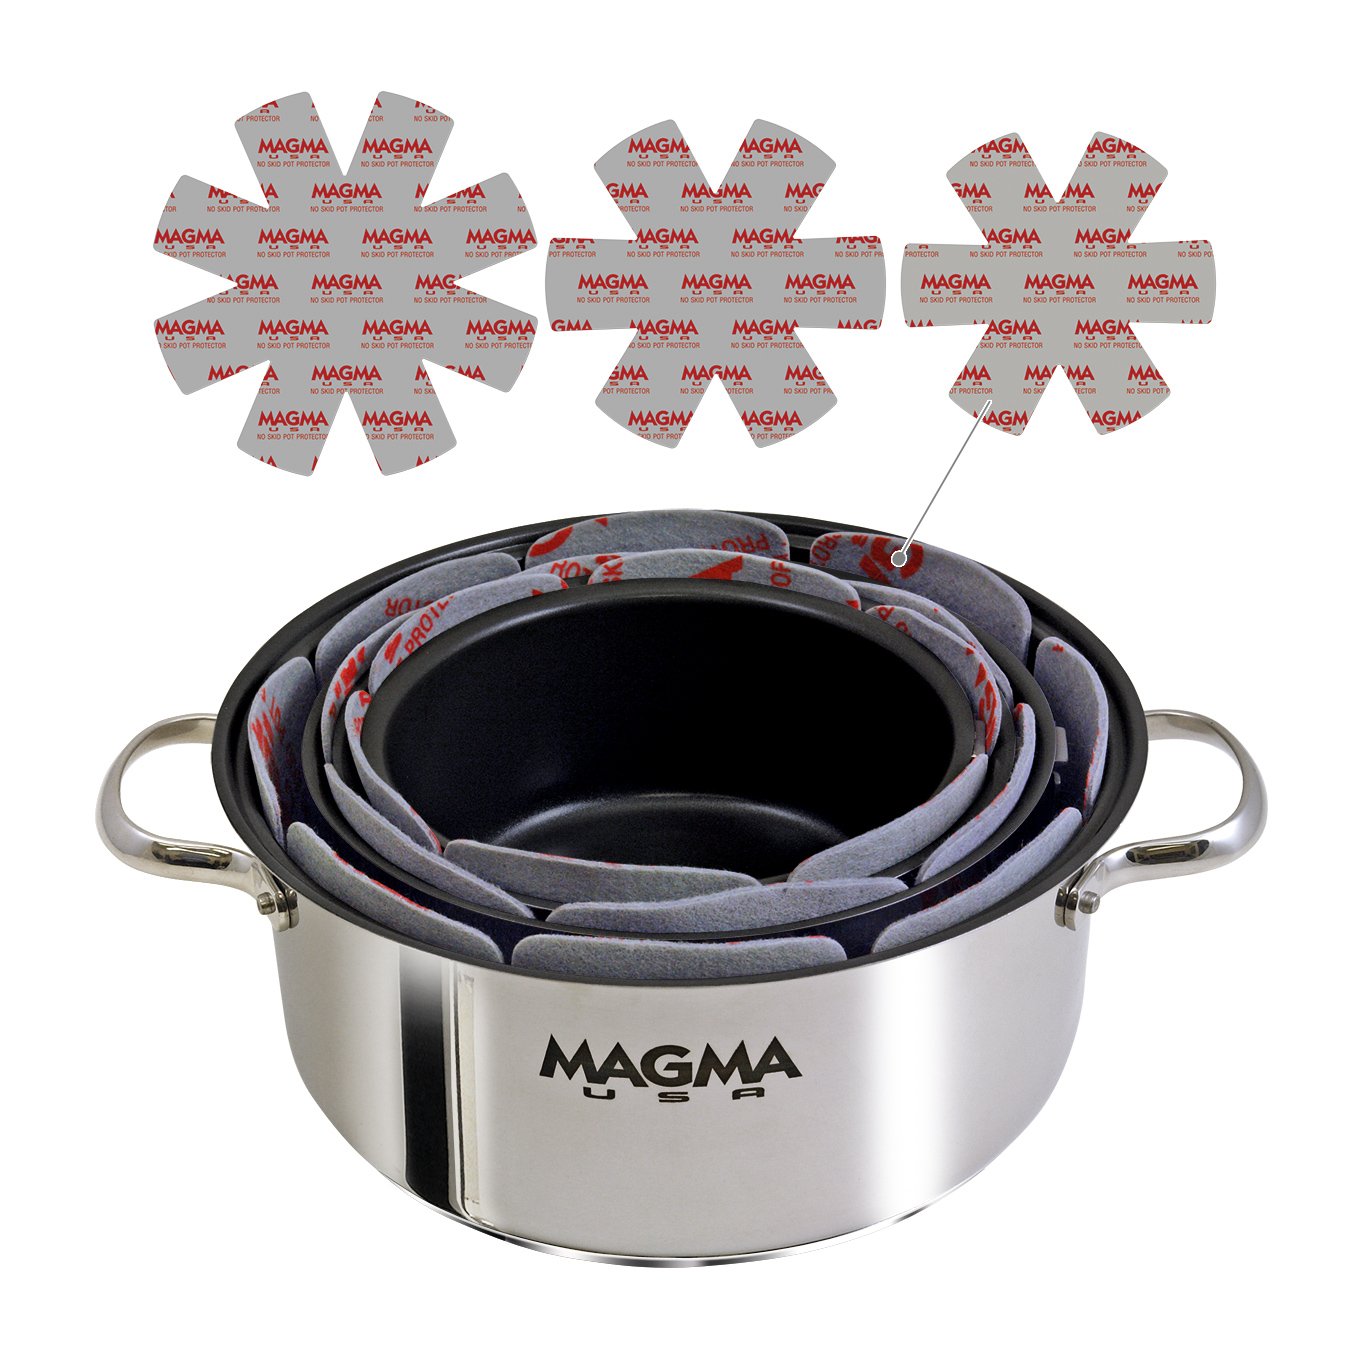 Buy Magma Nesting Induction Cookware Set 10 Pieces in USA Binnacle.com